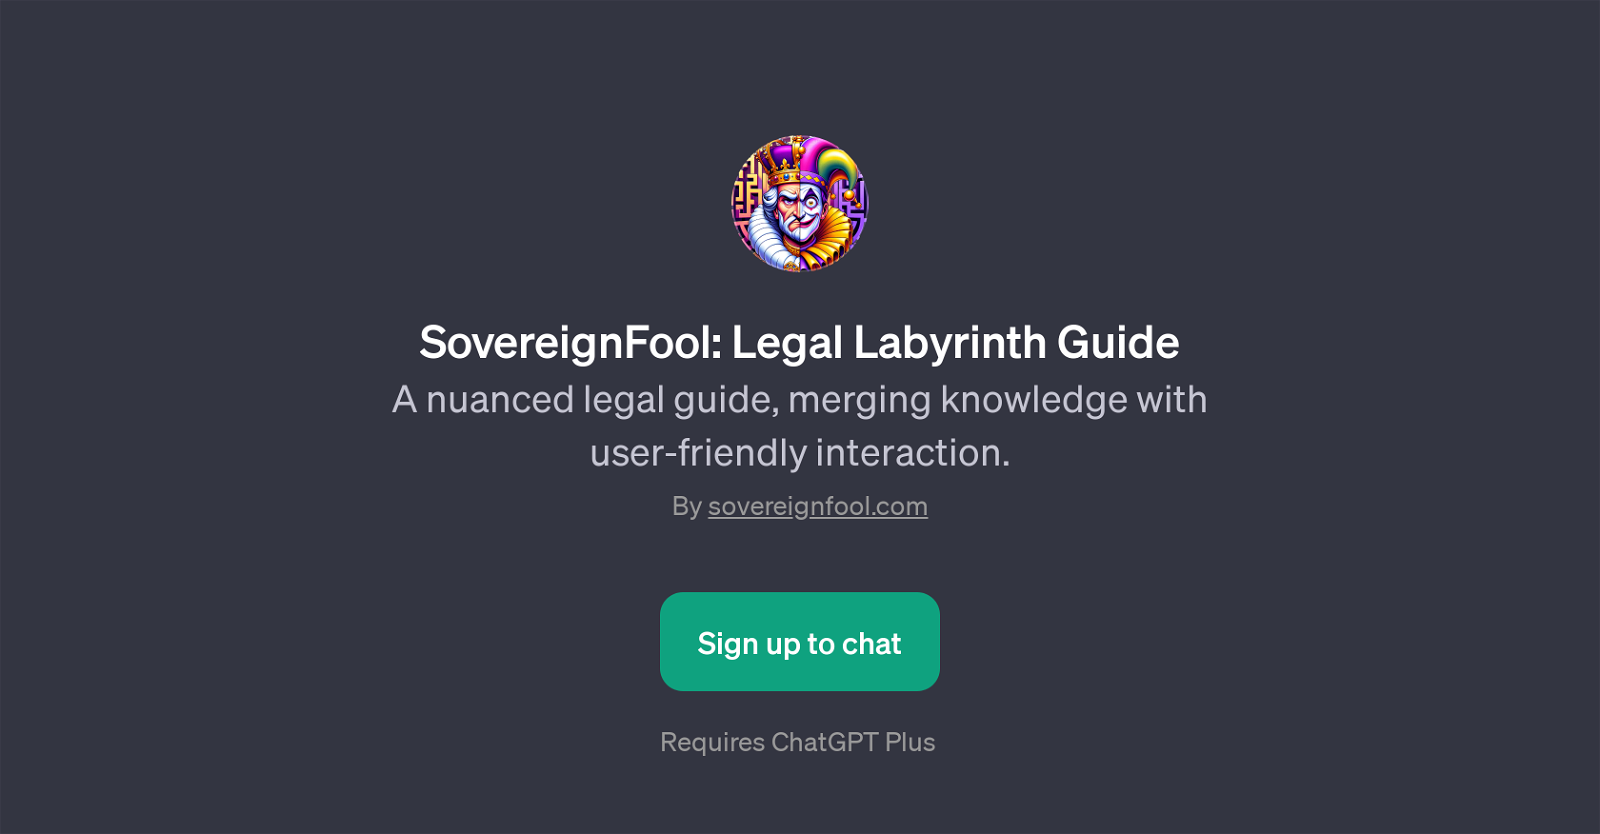 SovereignFool: Legal Labyrinth Guide website